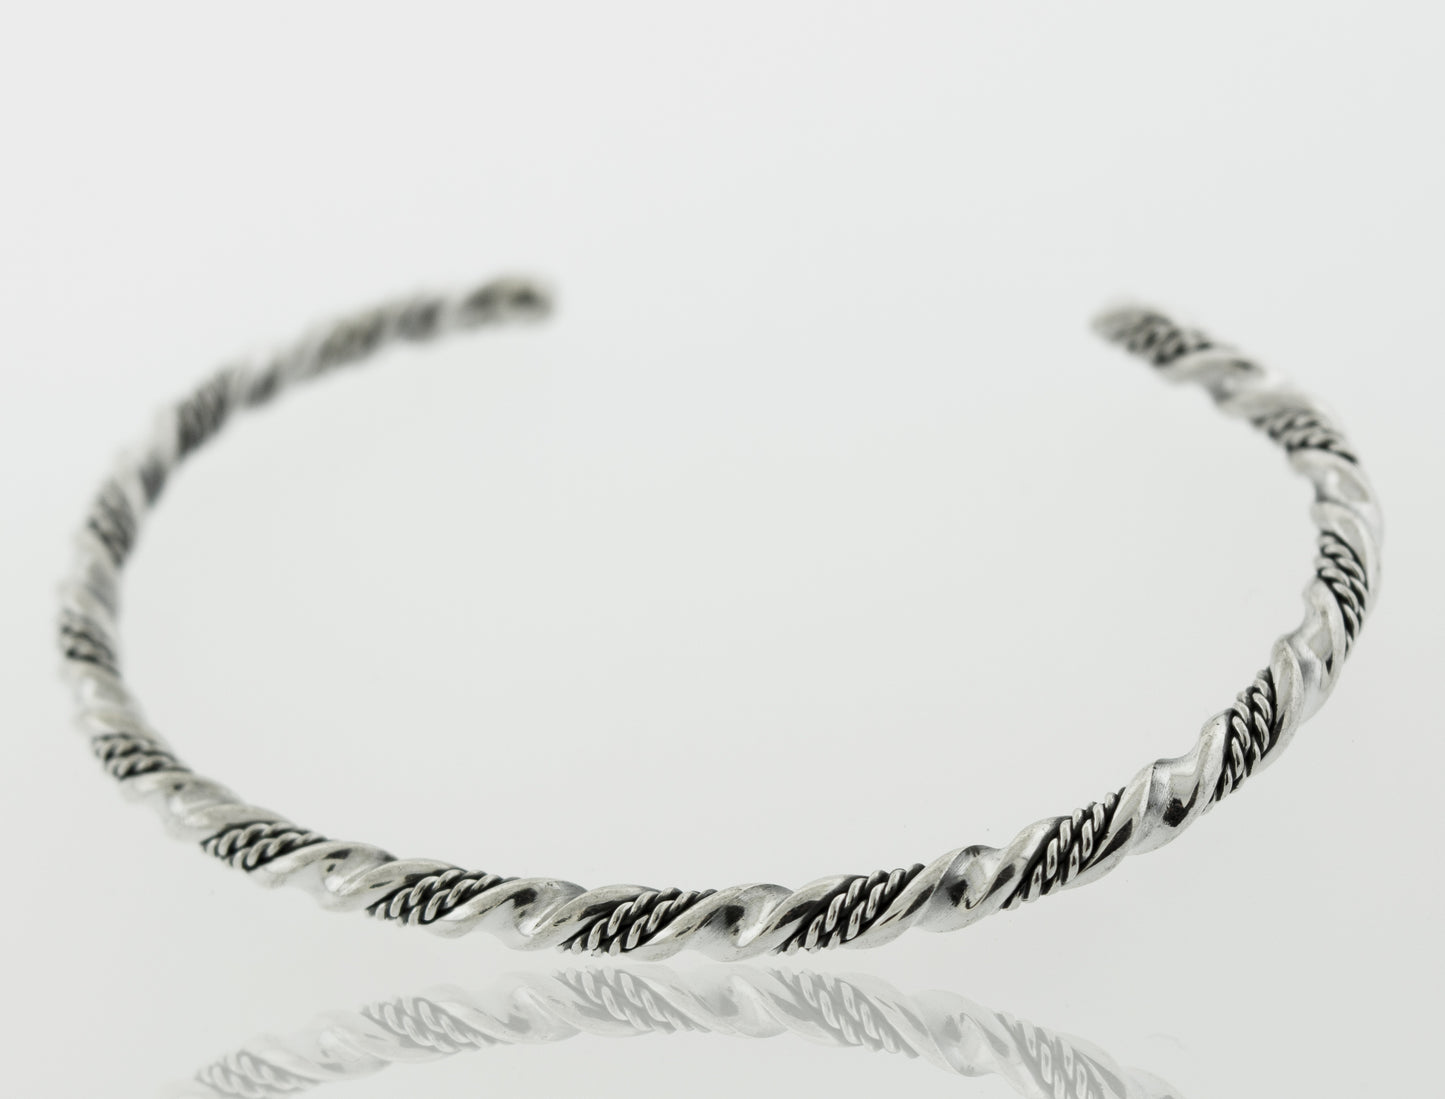 A Native American Handmade Silver Rope Twist cuff bracelet with an intricate braided design by Super Silver.